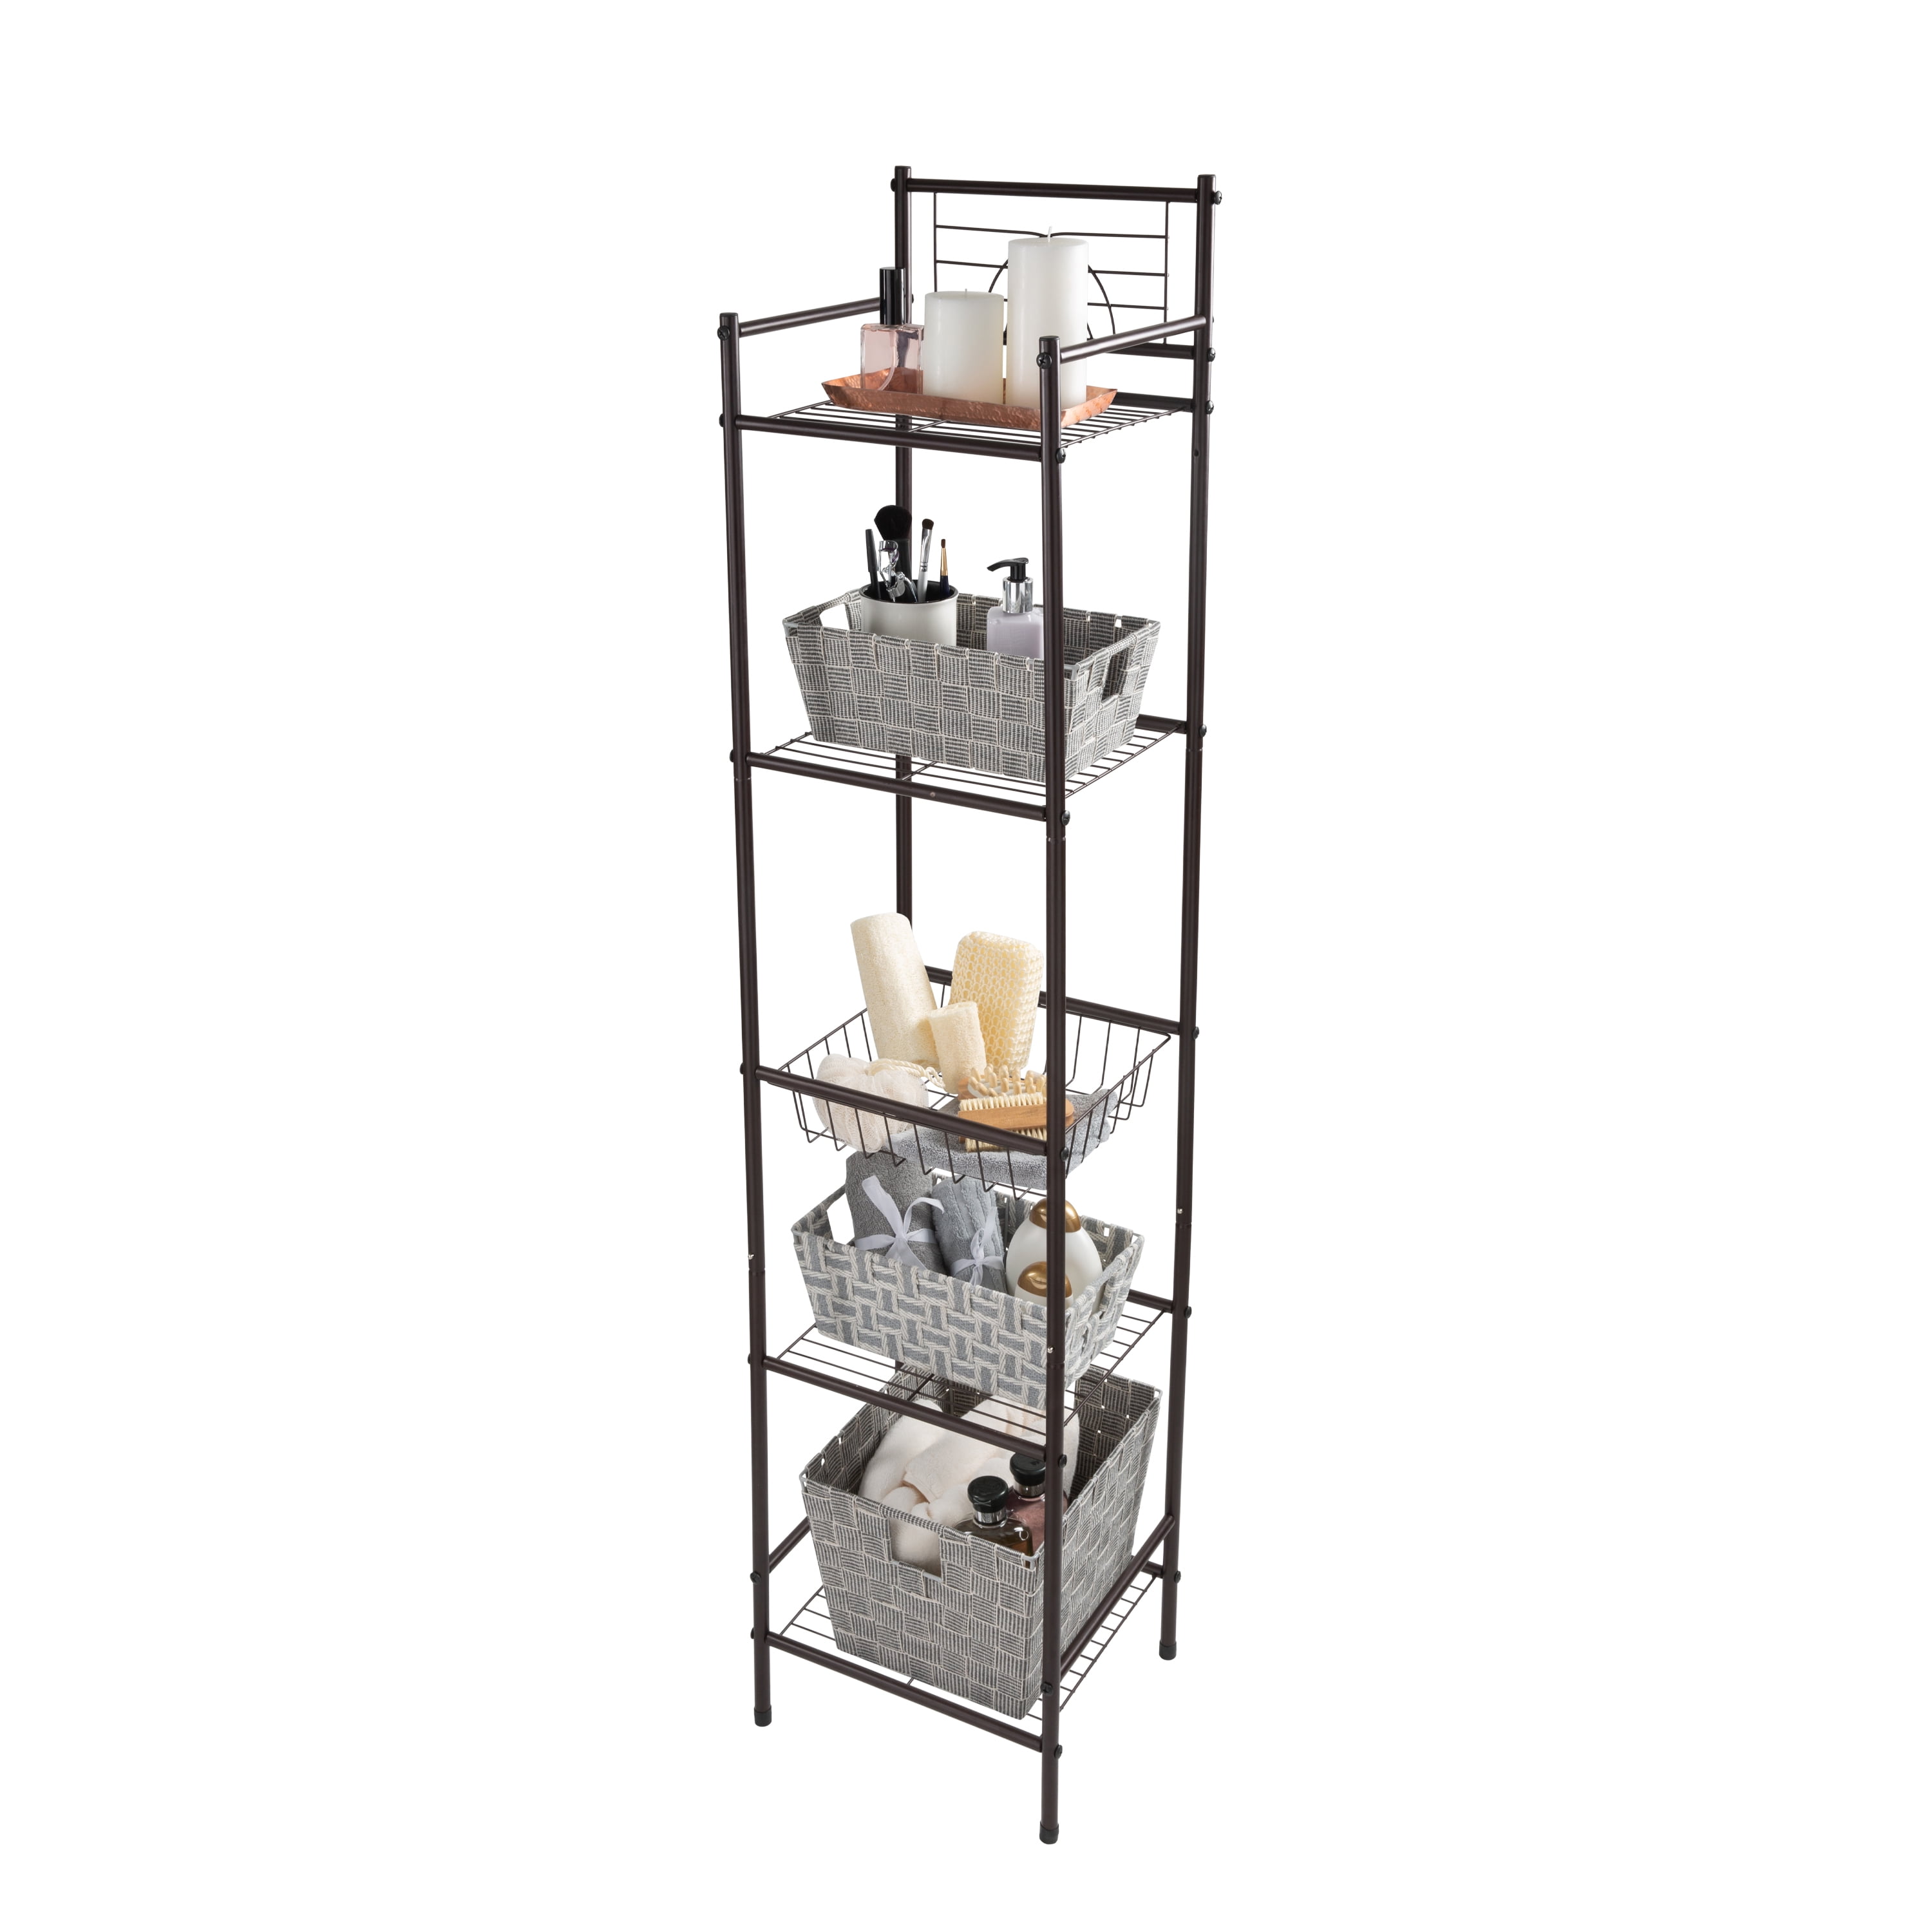 Burroughs 14.69 W x 42.7 H x 11.42 D Free-Standing Bathroom Shelves Andover Mills Finish: White